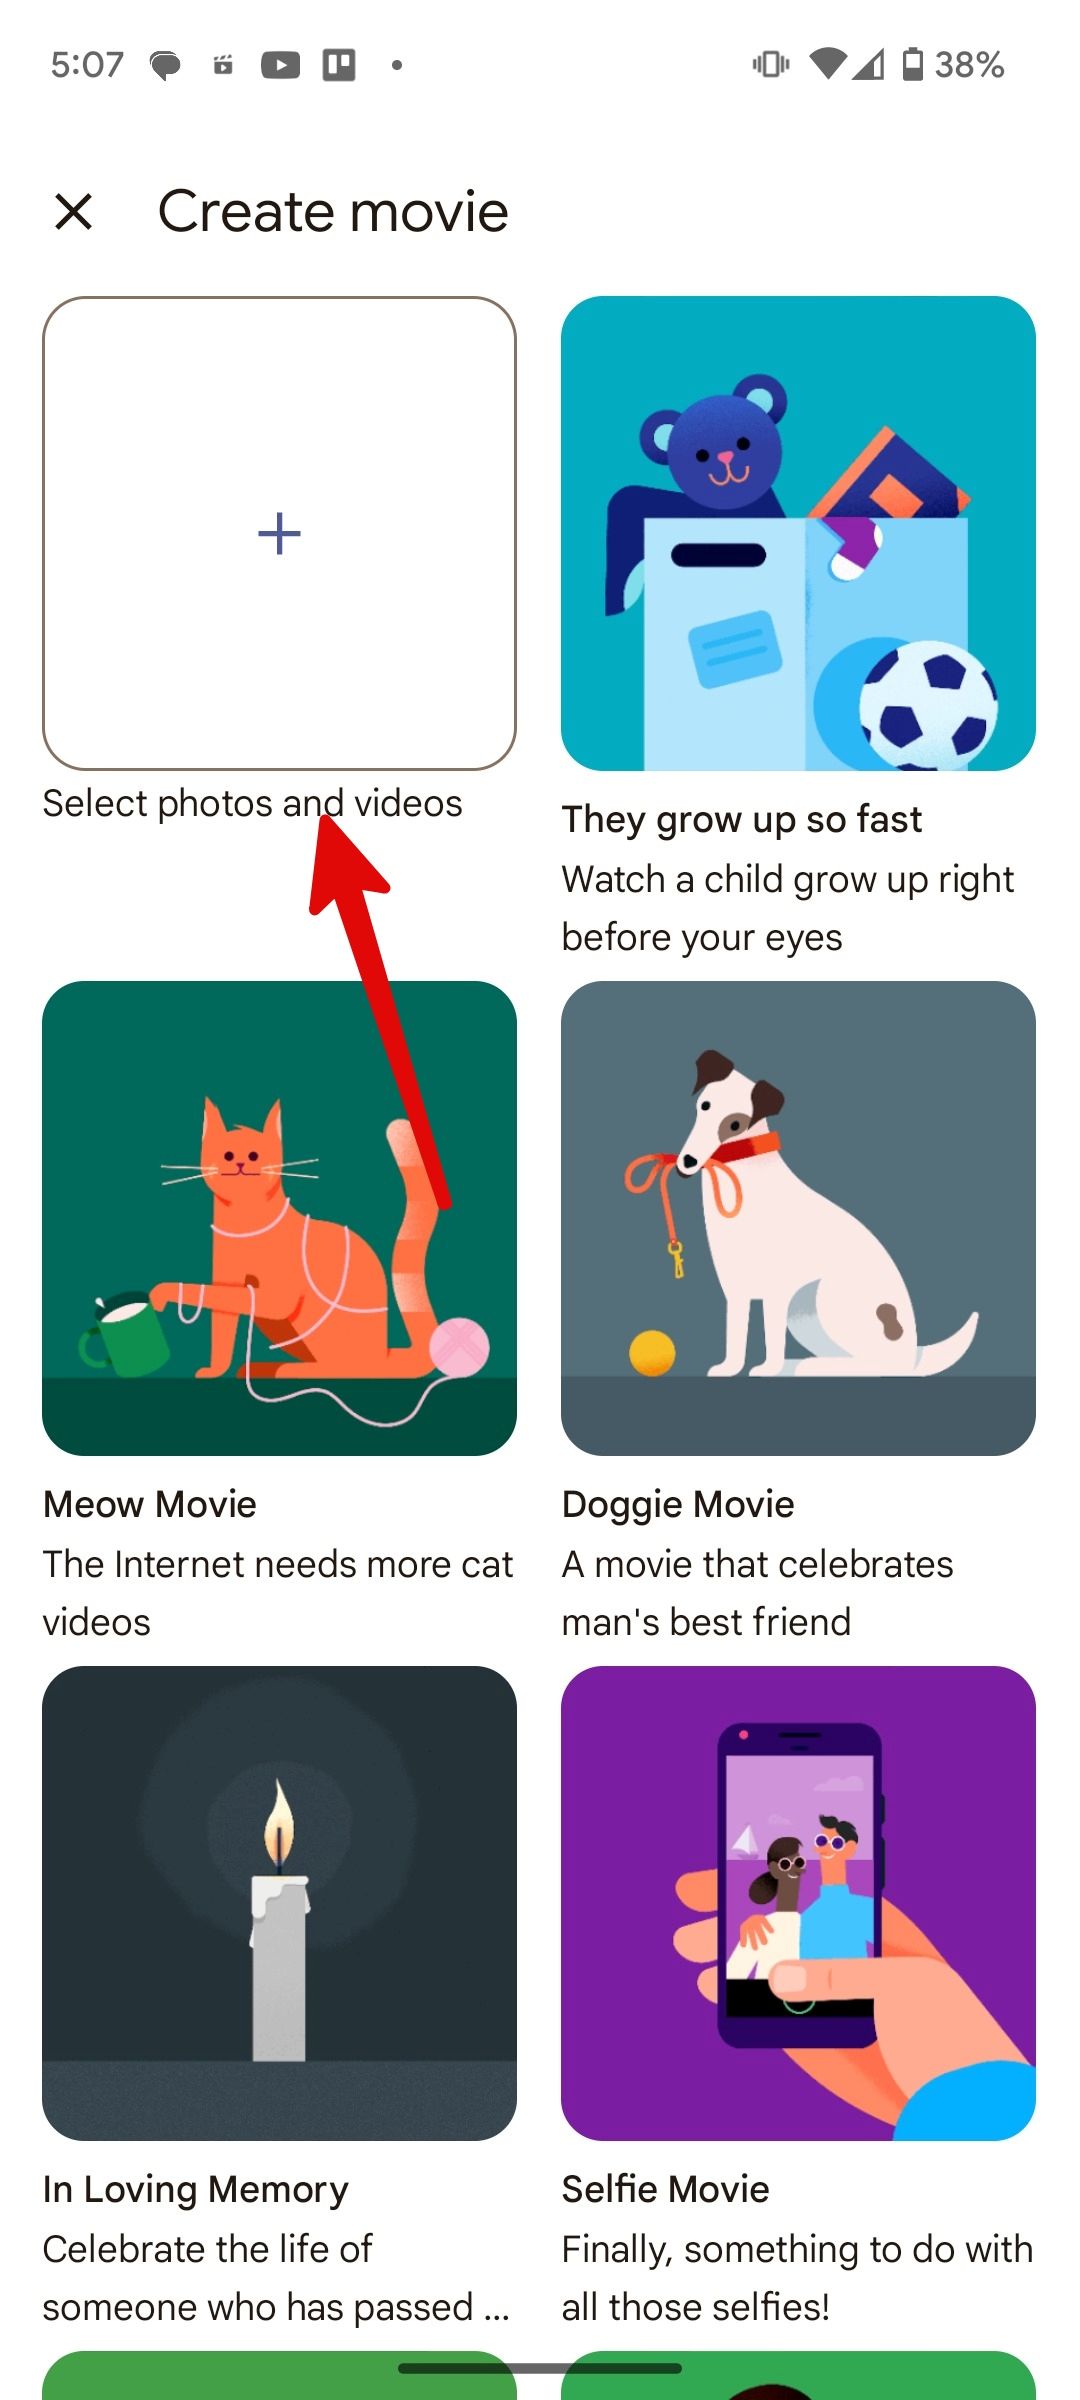 Google Photos showing how to select photos and videos